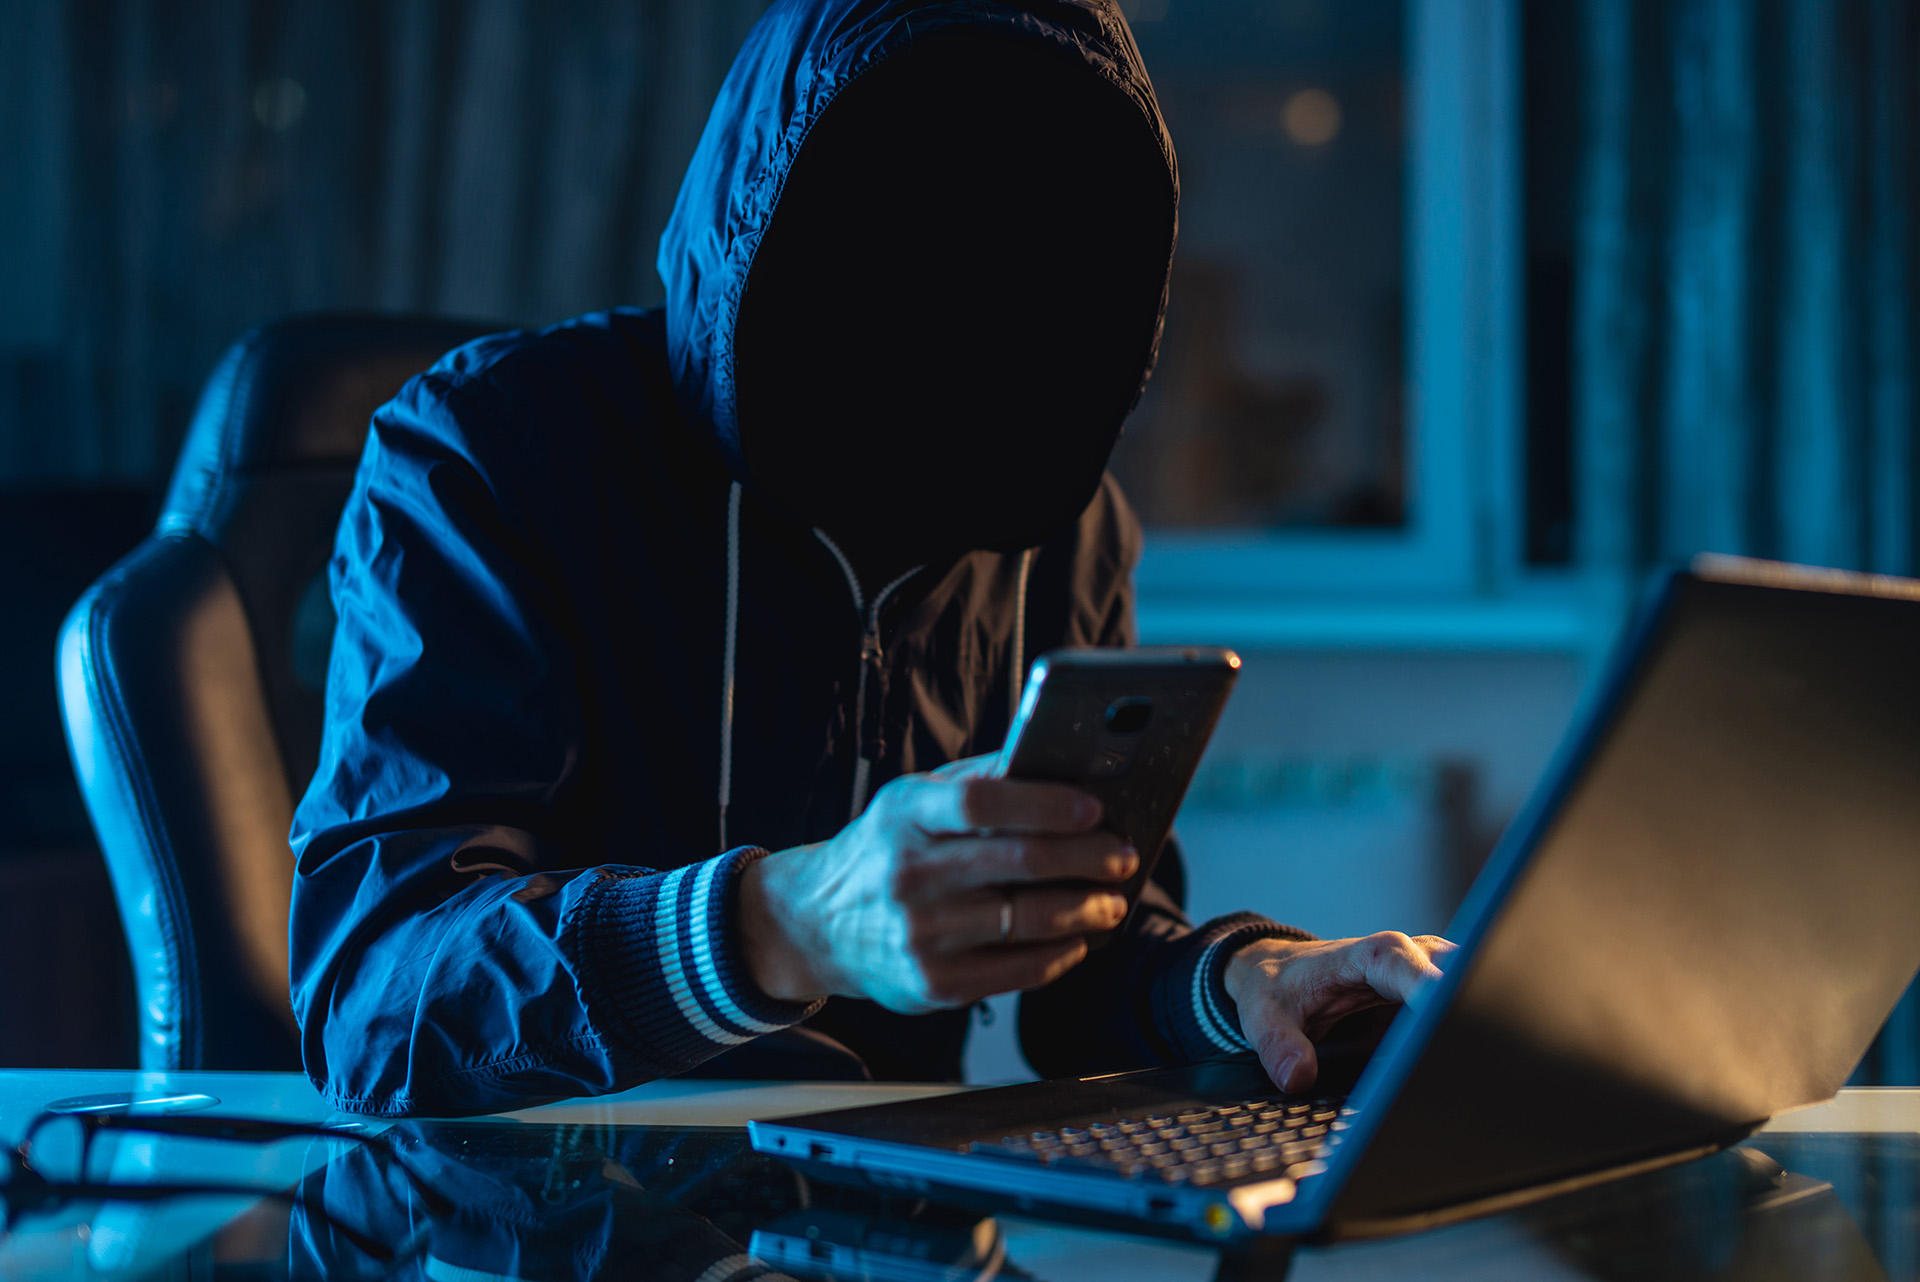 Criminals can also access student cell phones through public Wi-Fi networks found in the educational center (Credit: Shutterstock)